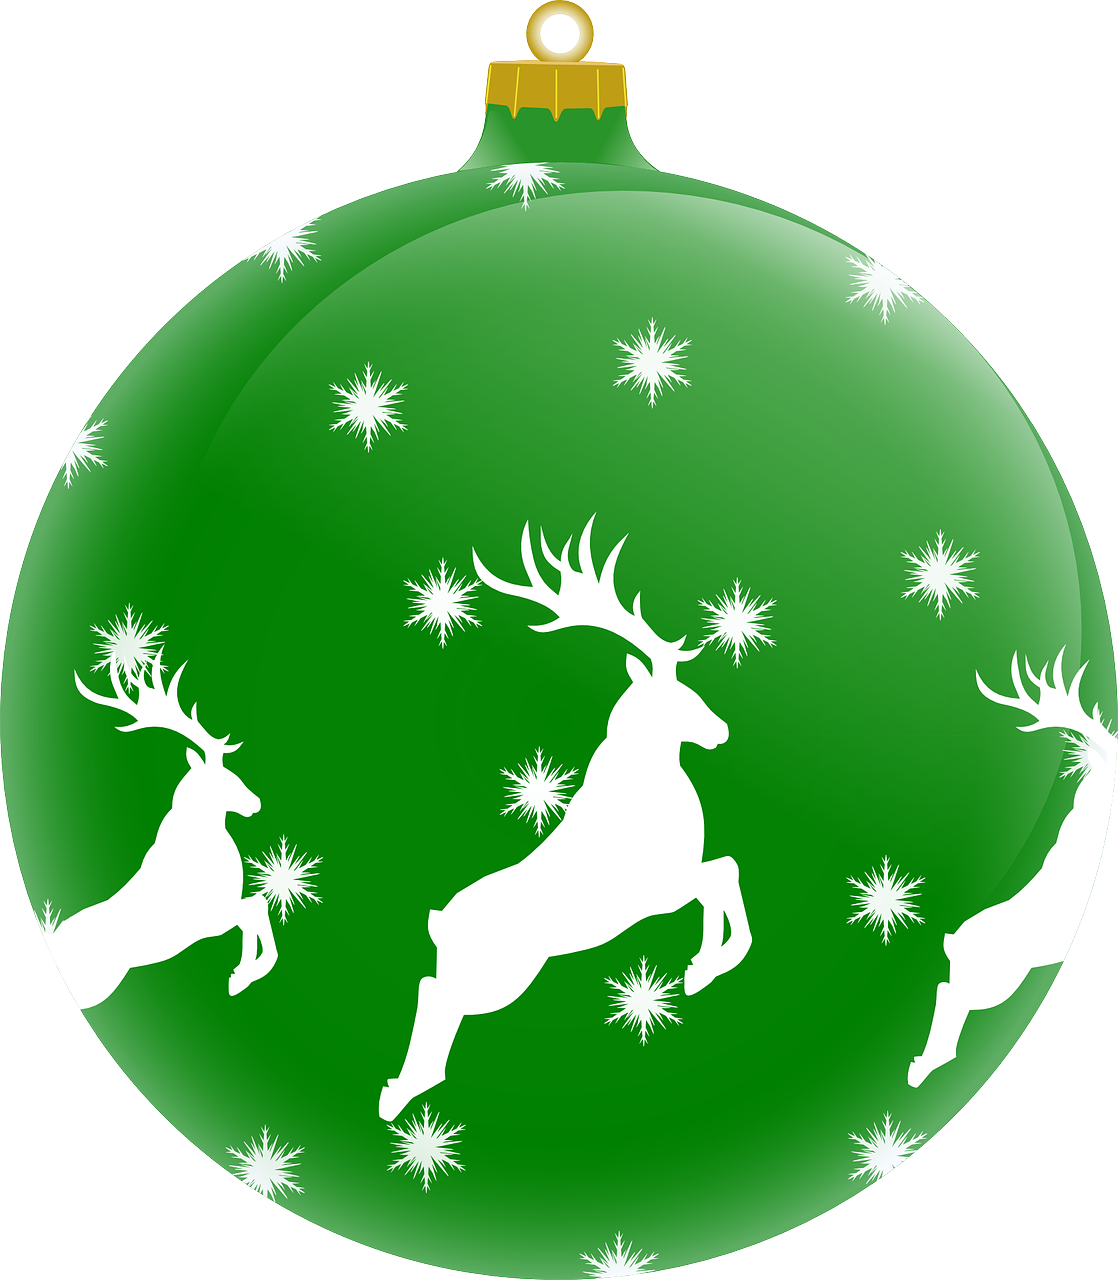 Download PNG image - Christmas Bauble PNG Background Image 